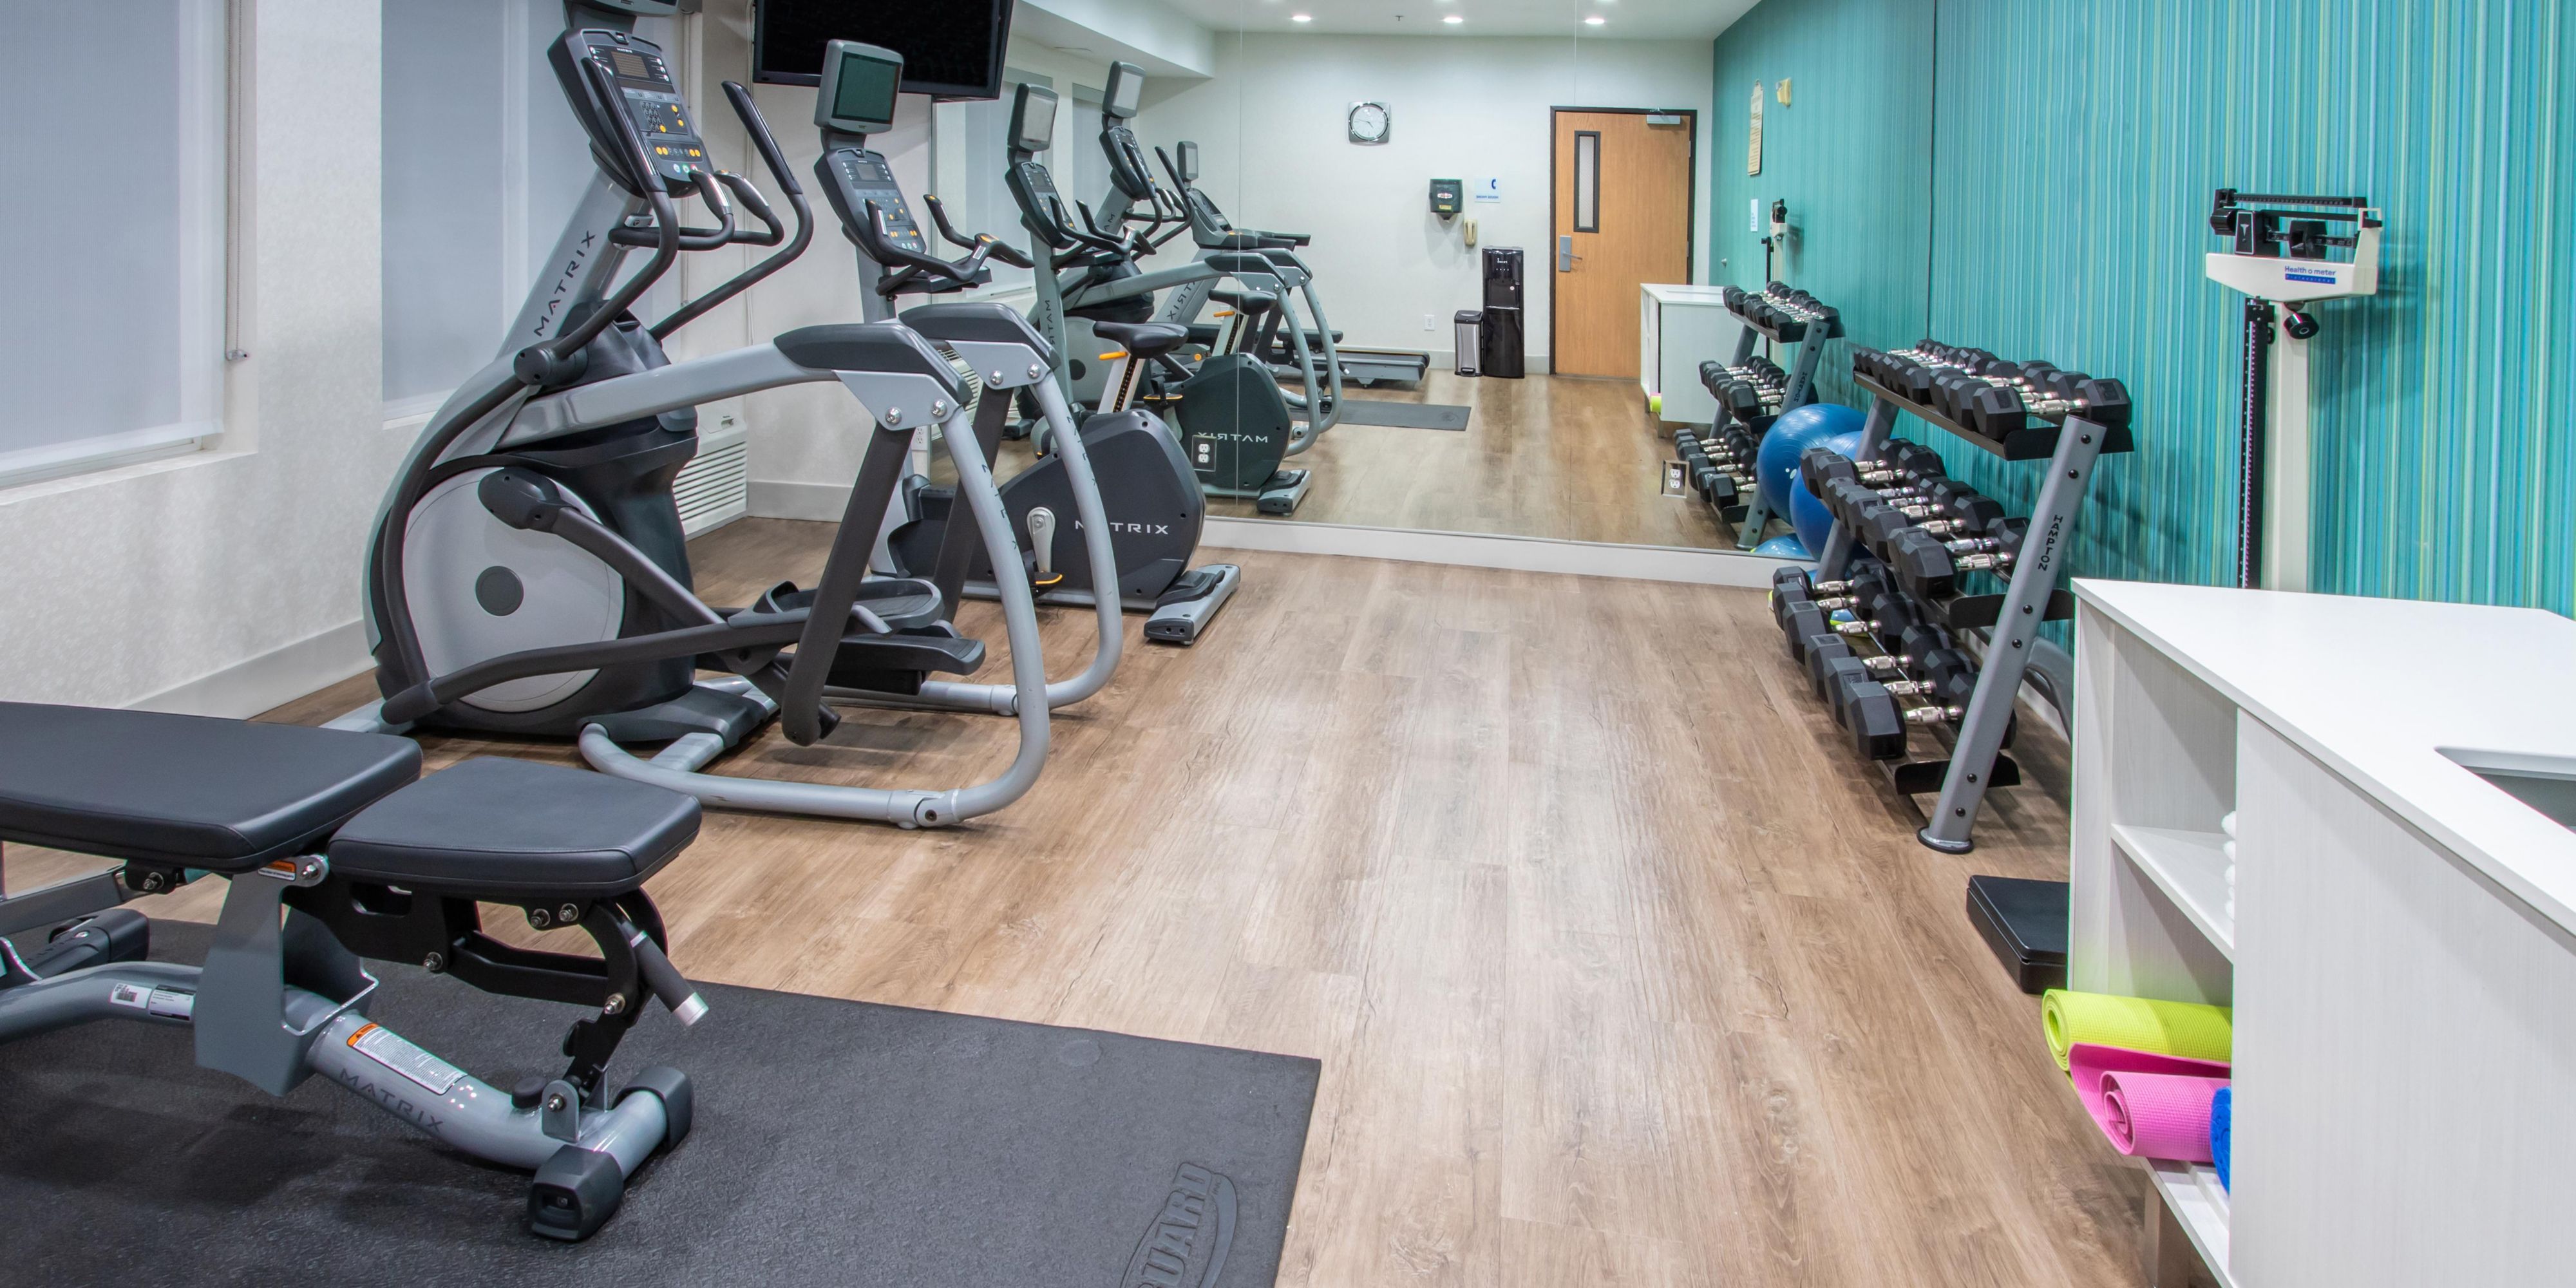 Stay on your fitness routine in our fitness room. Go ahead and break a sweat!